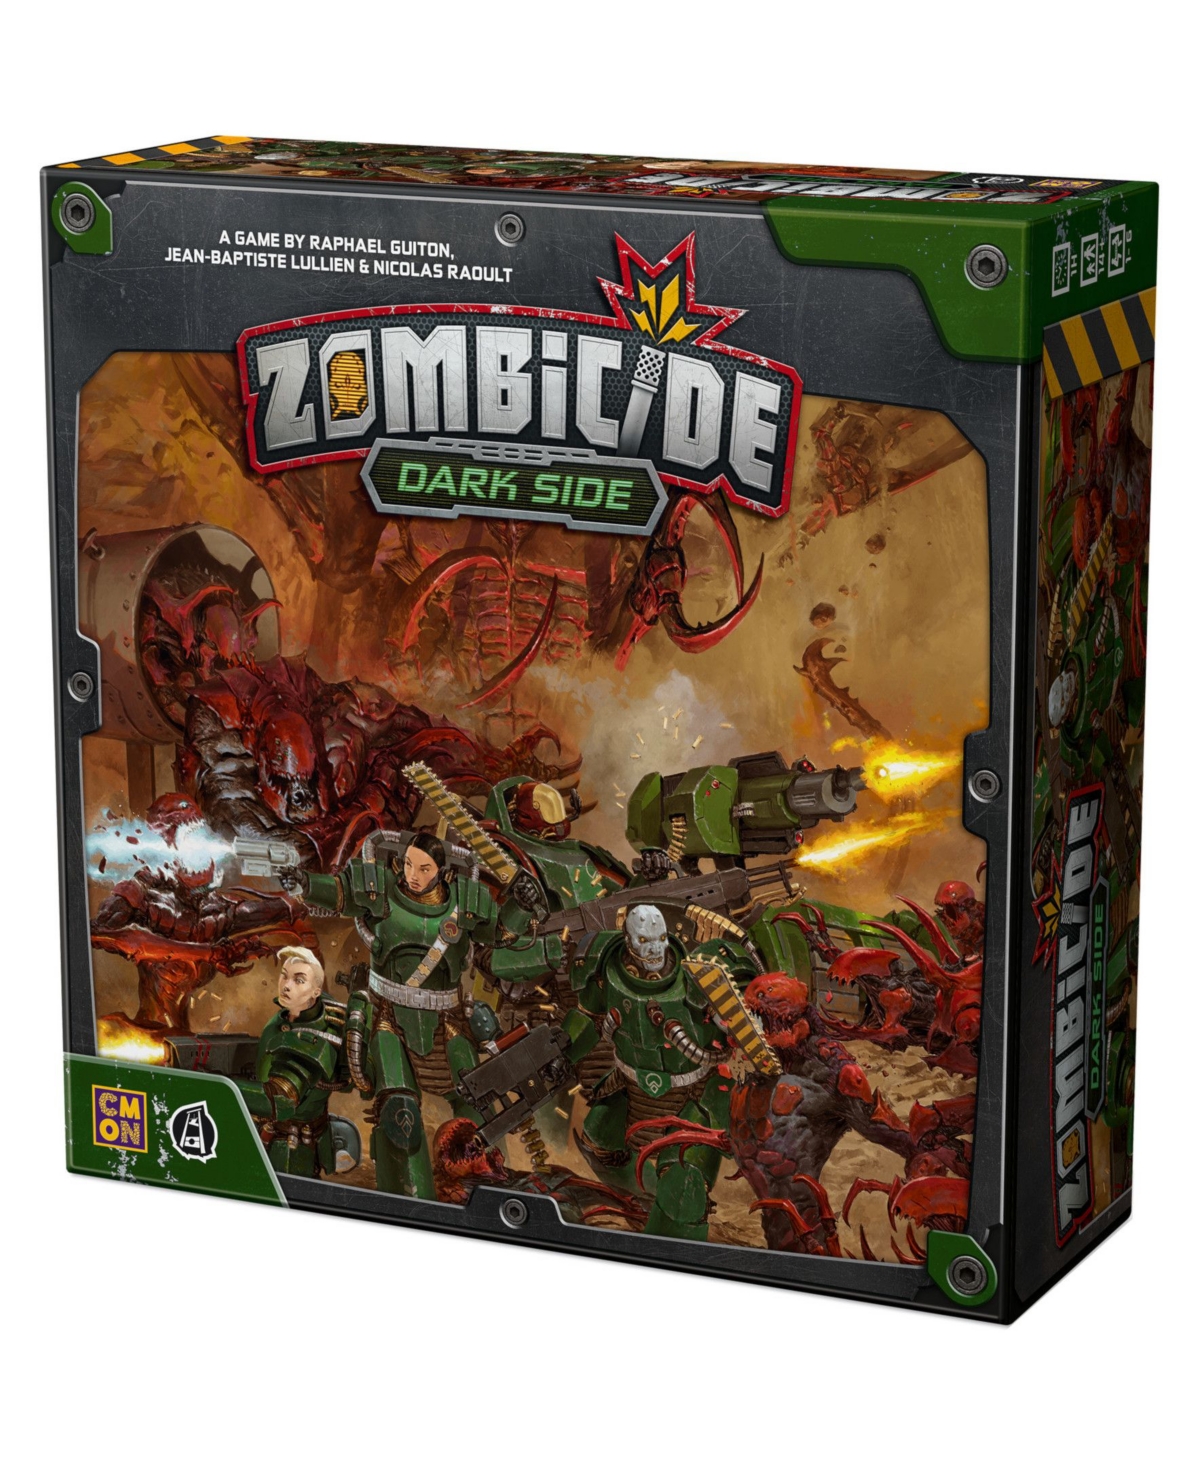 Masterpieces Puzzles Asmodee Editions Zombicide Strategy Board Game- Dark Side Expansion In No Color